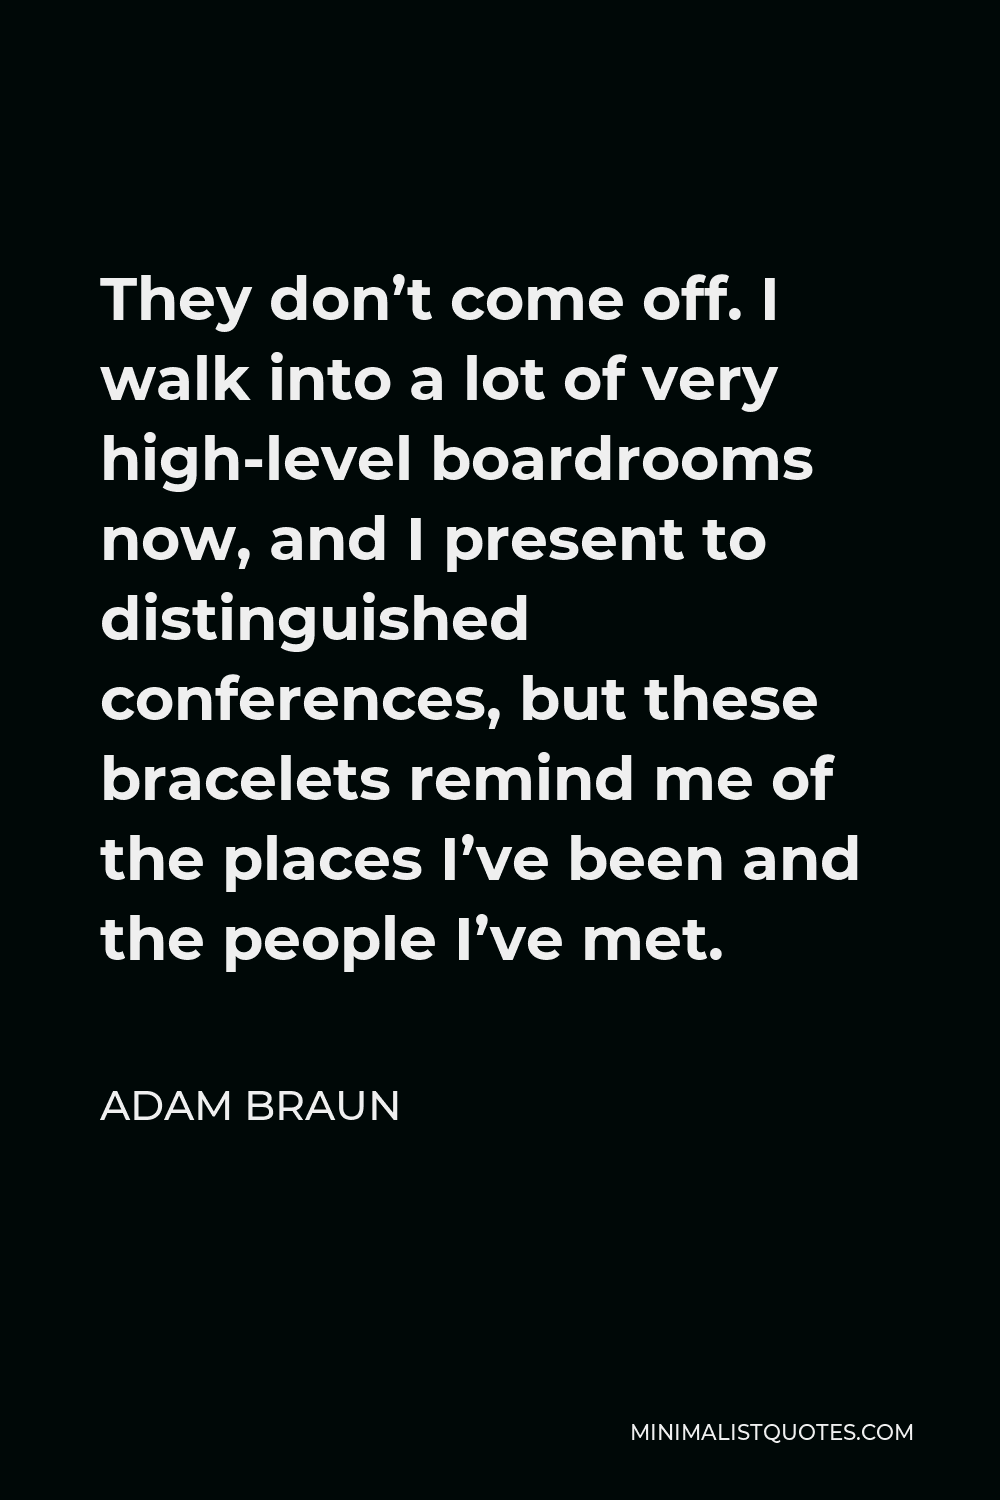 Adam Braun Quote - They don’t come off. I walk into a lot of very high-level boardrooms now, and I present to distinguished conferences, but these bracelets remind me of the places I’ve been and the people I’ve met.